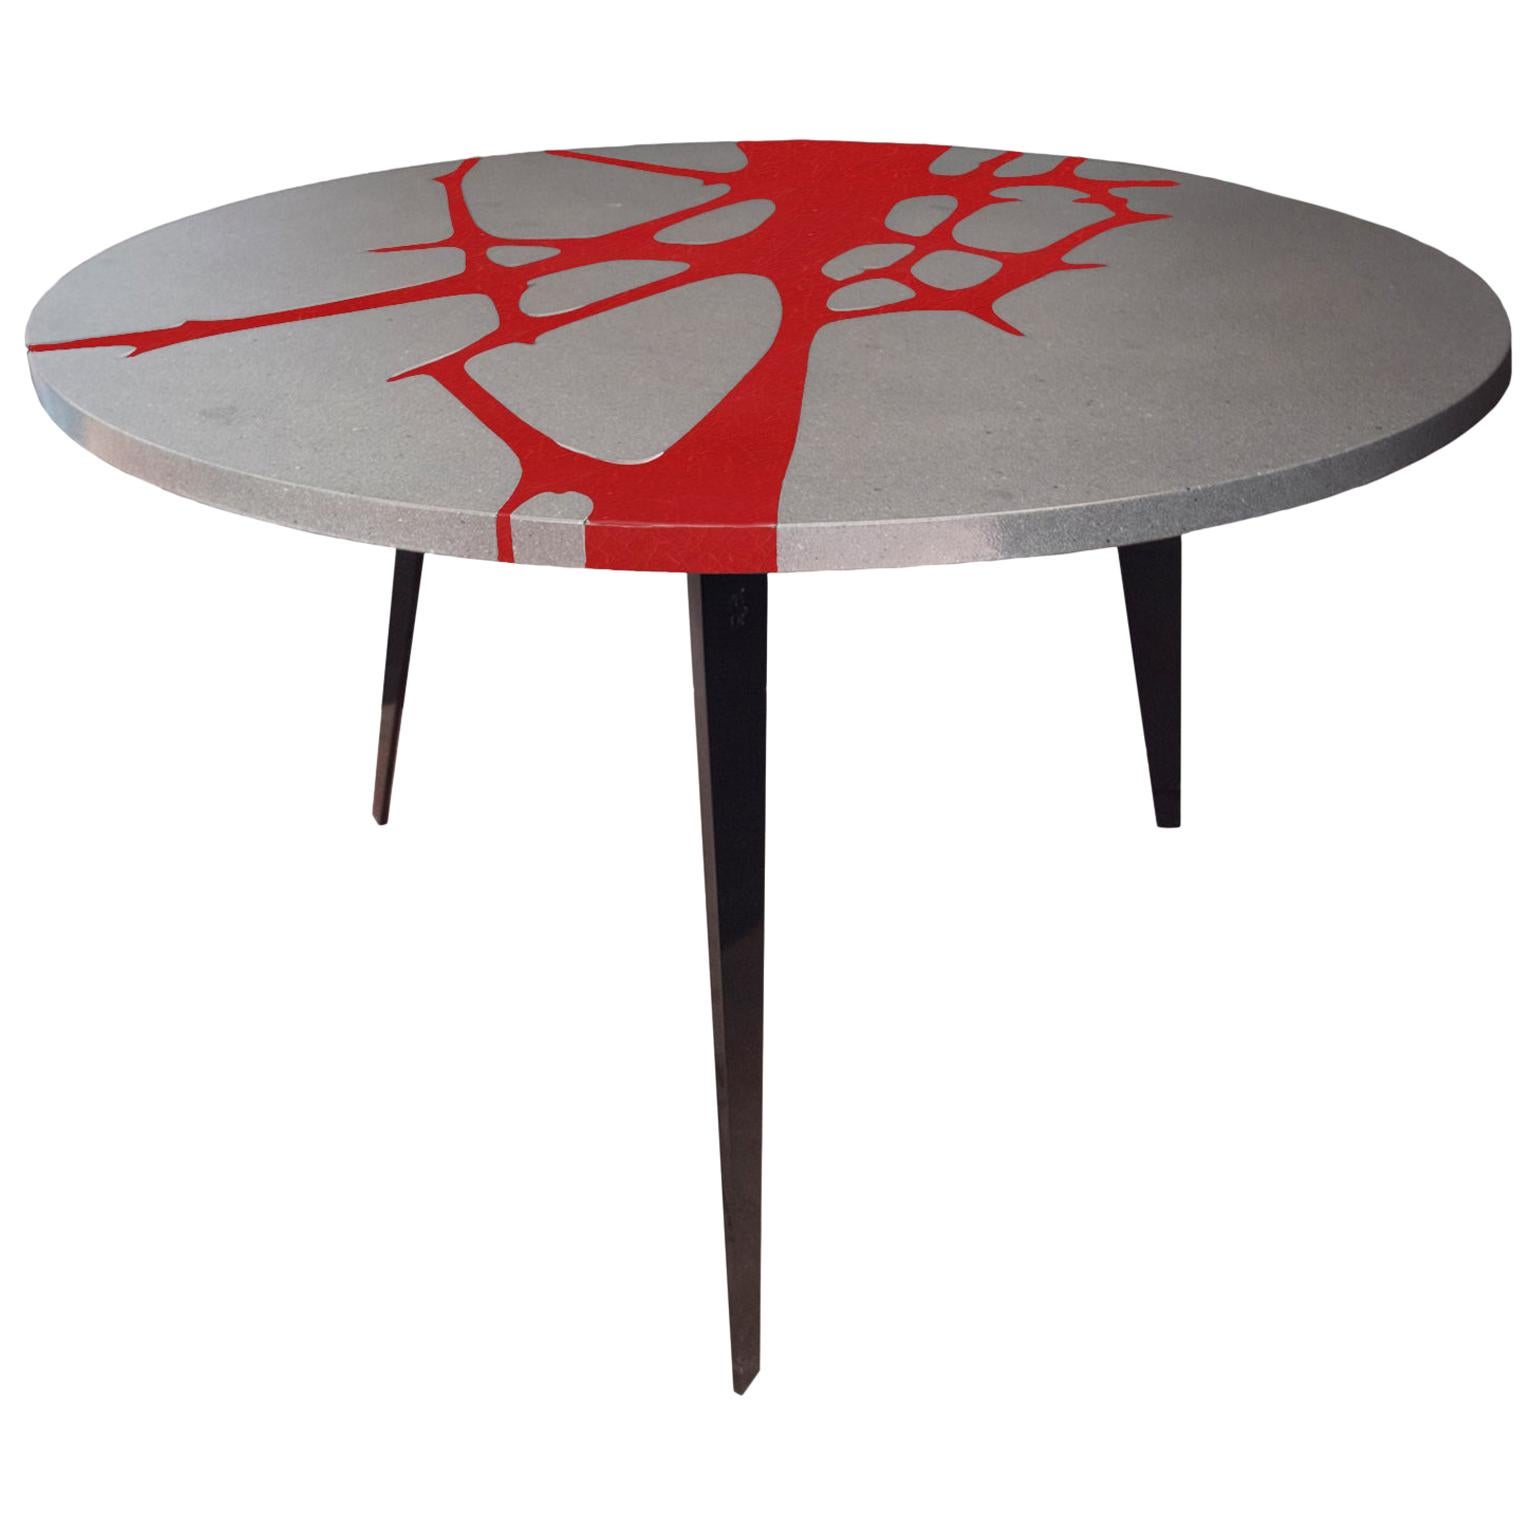 Round Patio Table in Lava Stone and Steel, Filodifumo 1st, Red Enamel For Sale